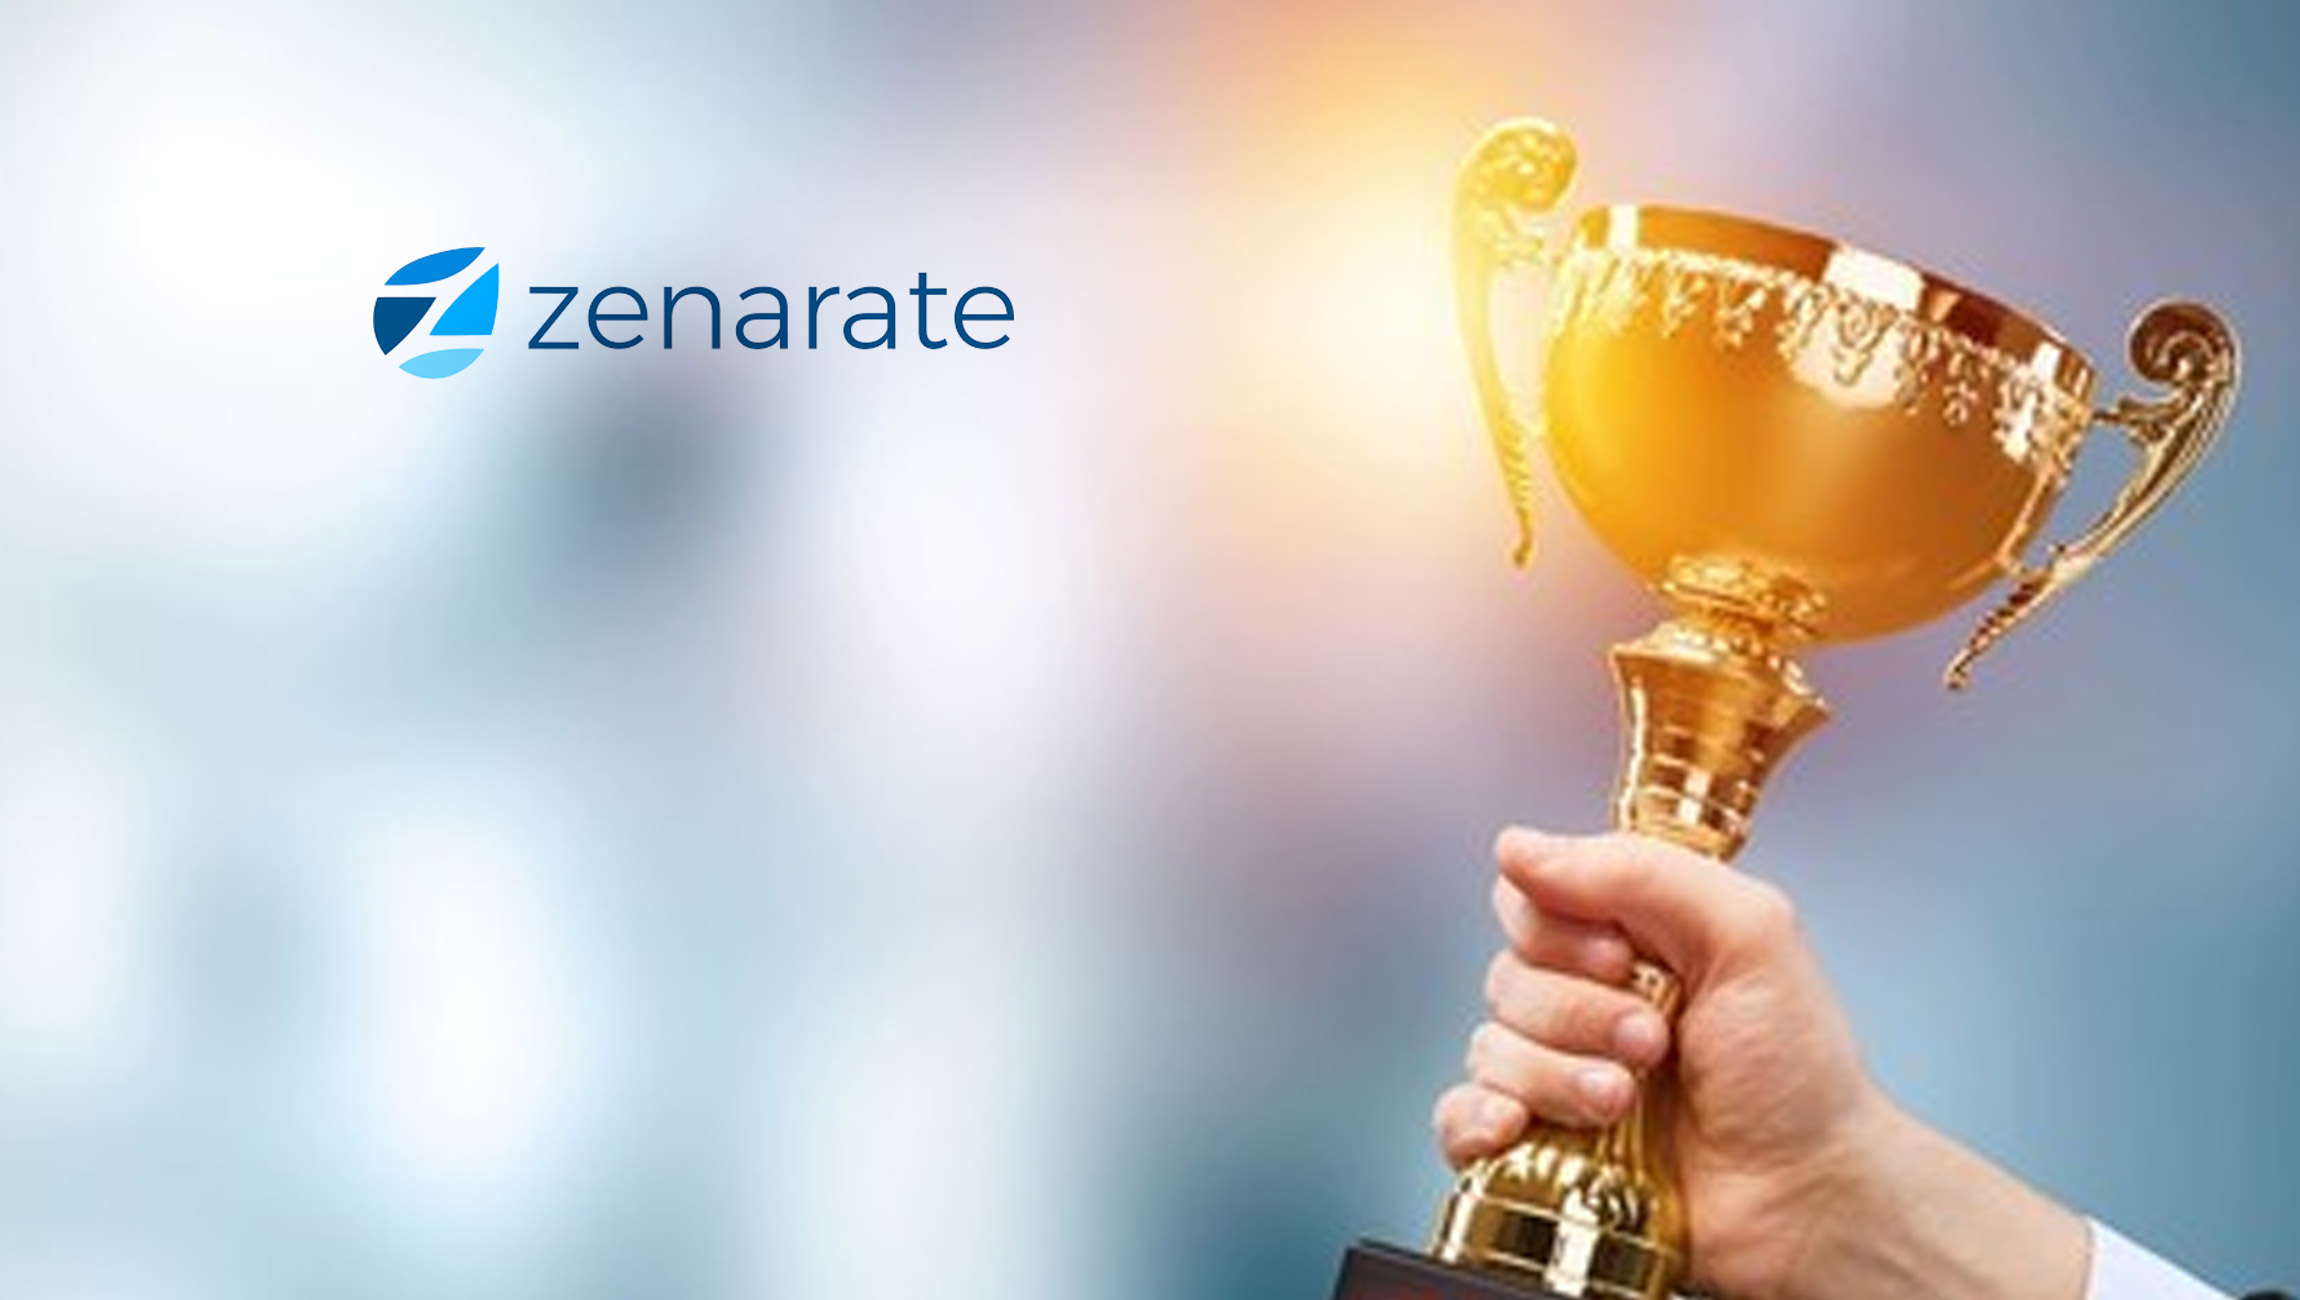 Zenarate Wins the Financial Technology 2022 Tech Trailblazers Award for Simulation Training in Contact Centers